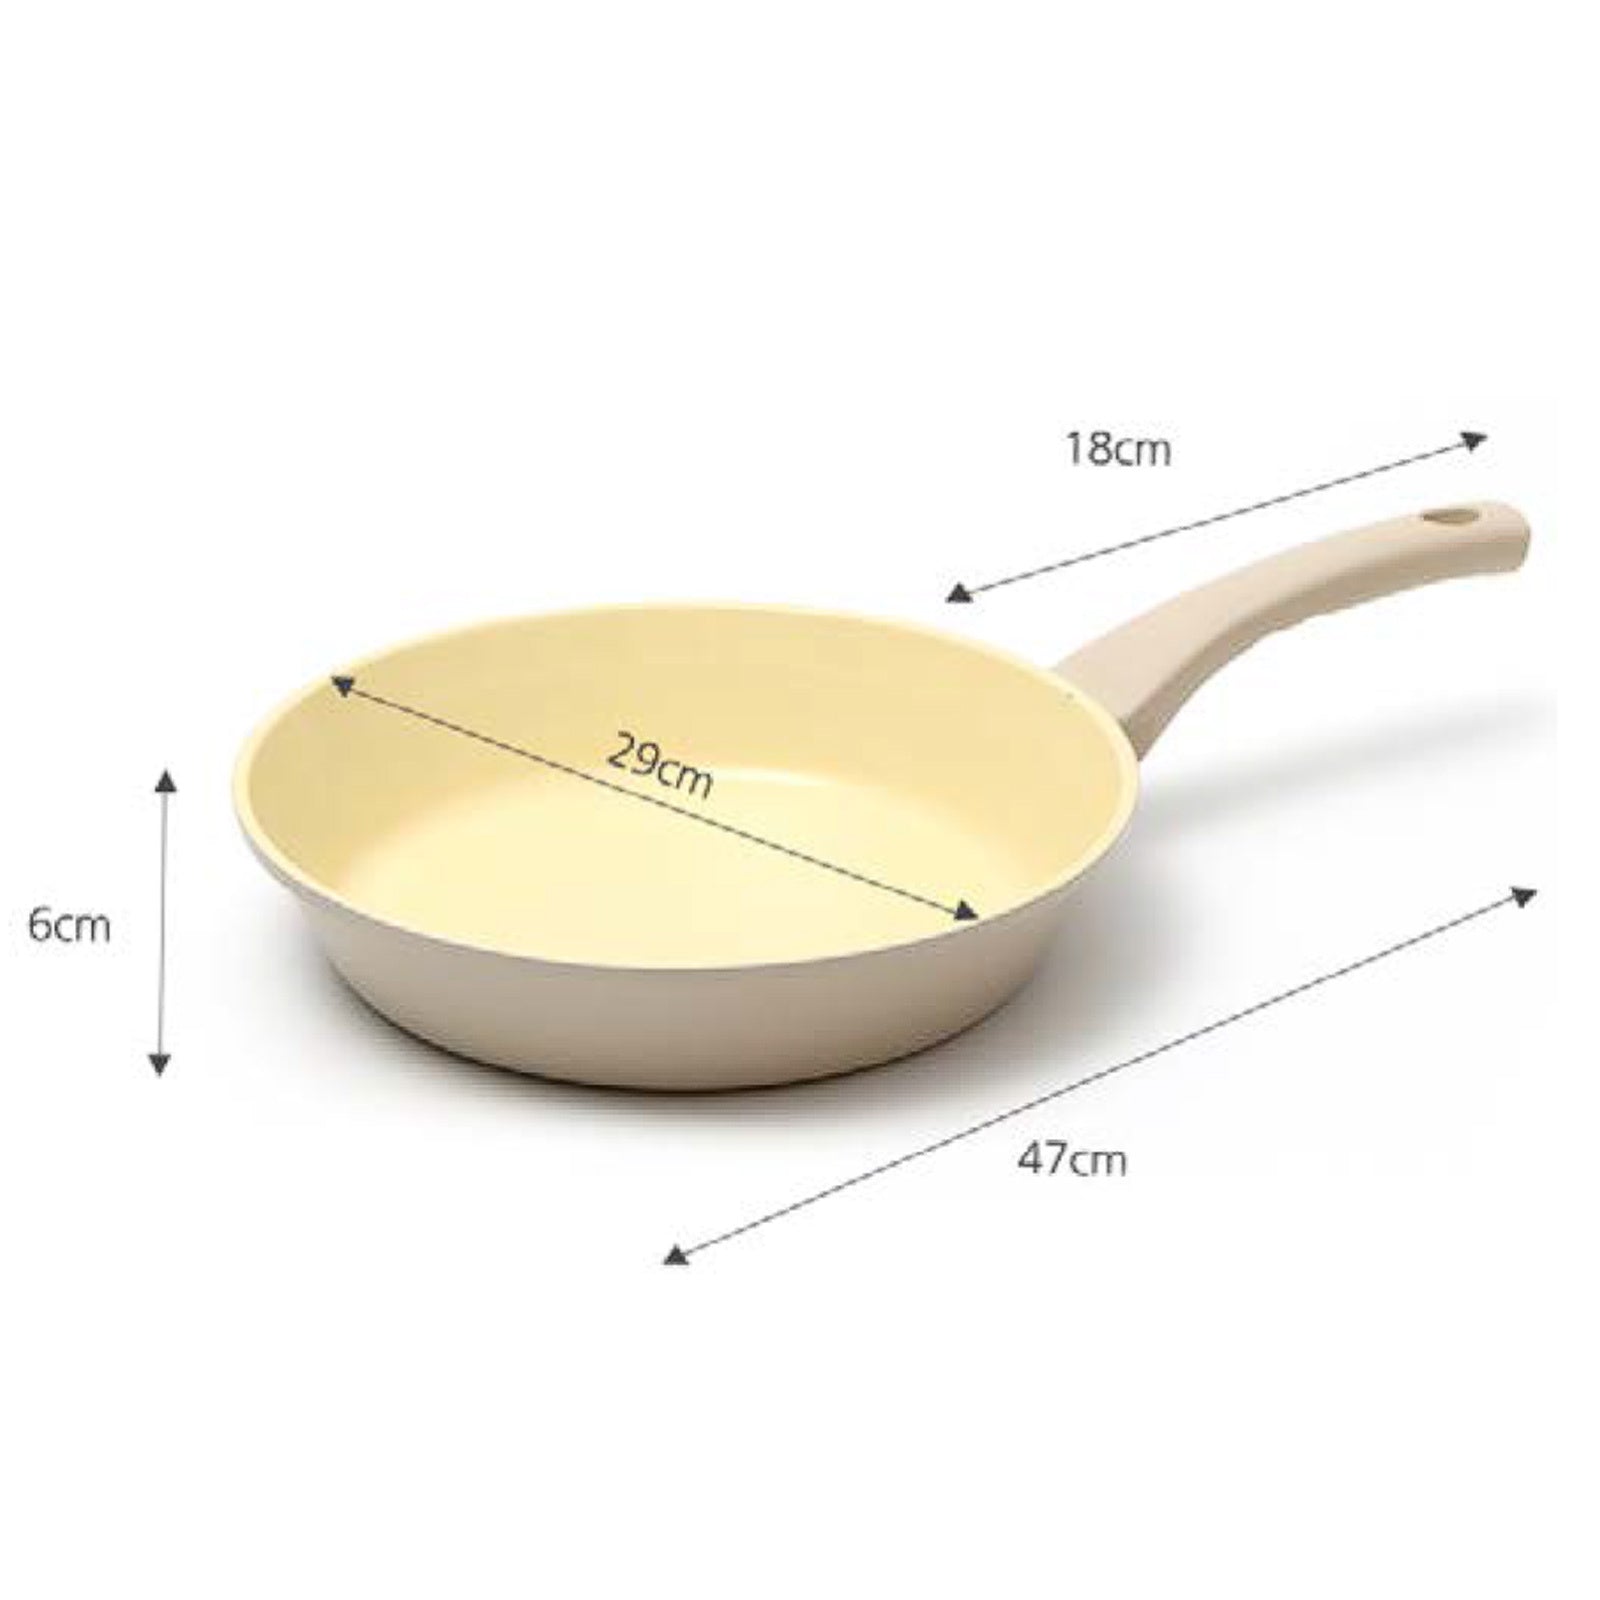 Giorno Felice 28cm Beige IH Frypan Ceramic Non-Stick Frying Pan Induction